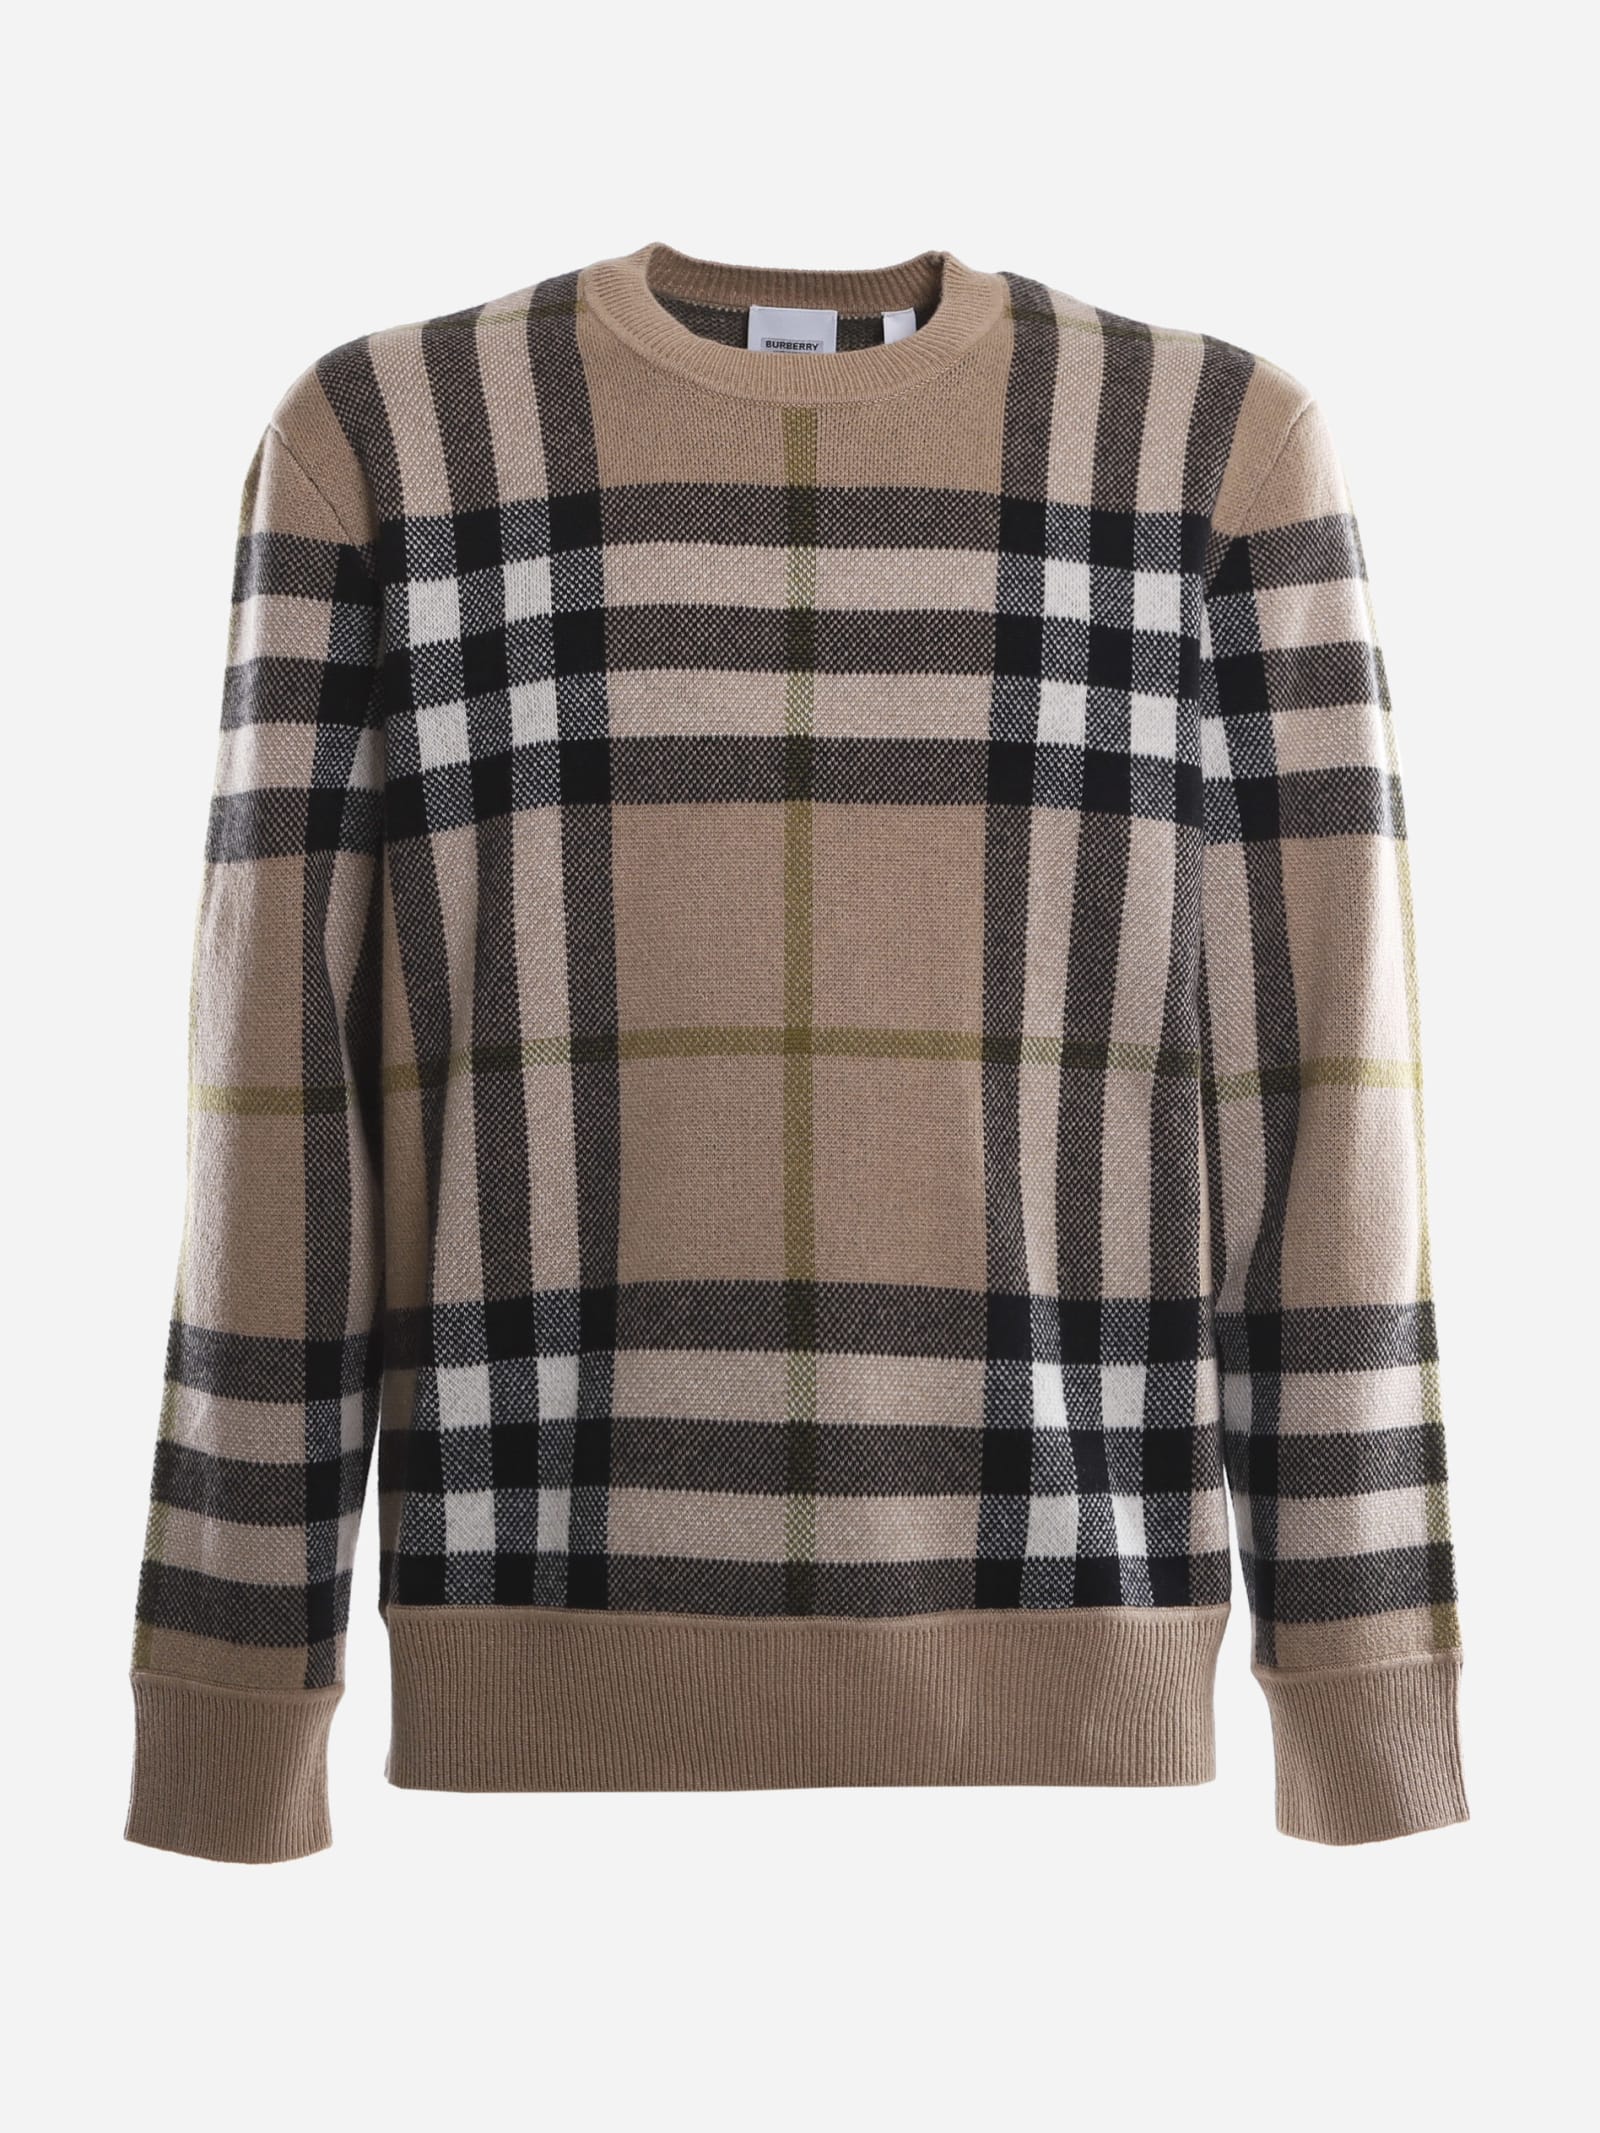 BURBERRY CASHMERE PULLOVER WITH JACQUARD TARTAN MOTIF,8041286 -A8704